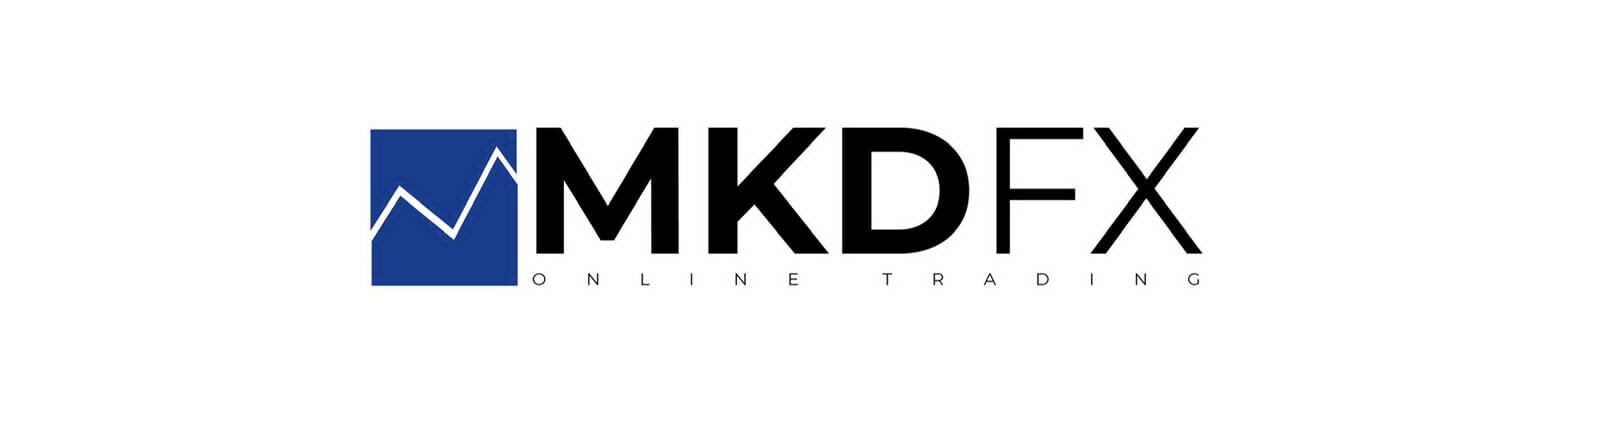 Online Trading Platform MKDFX Is Providing Exclusive Benefits to Its Customers